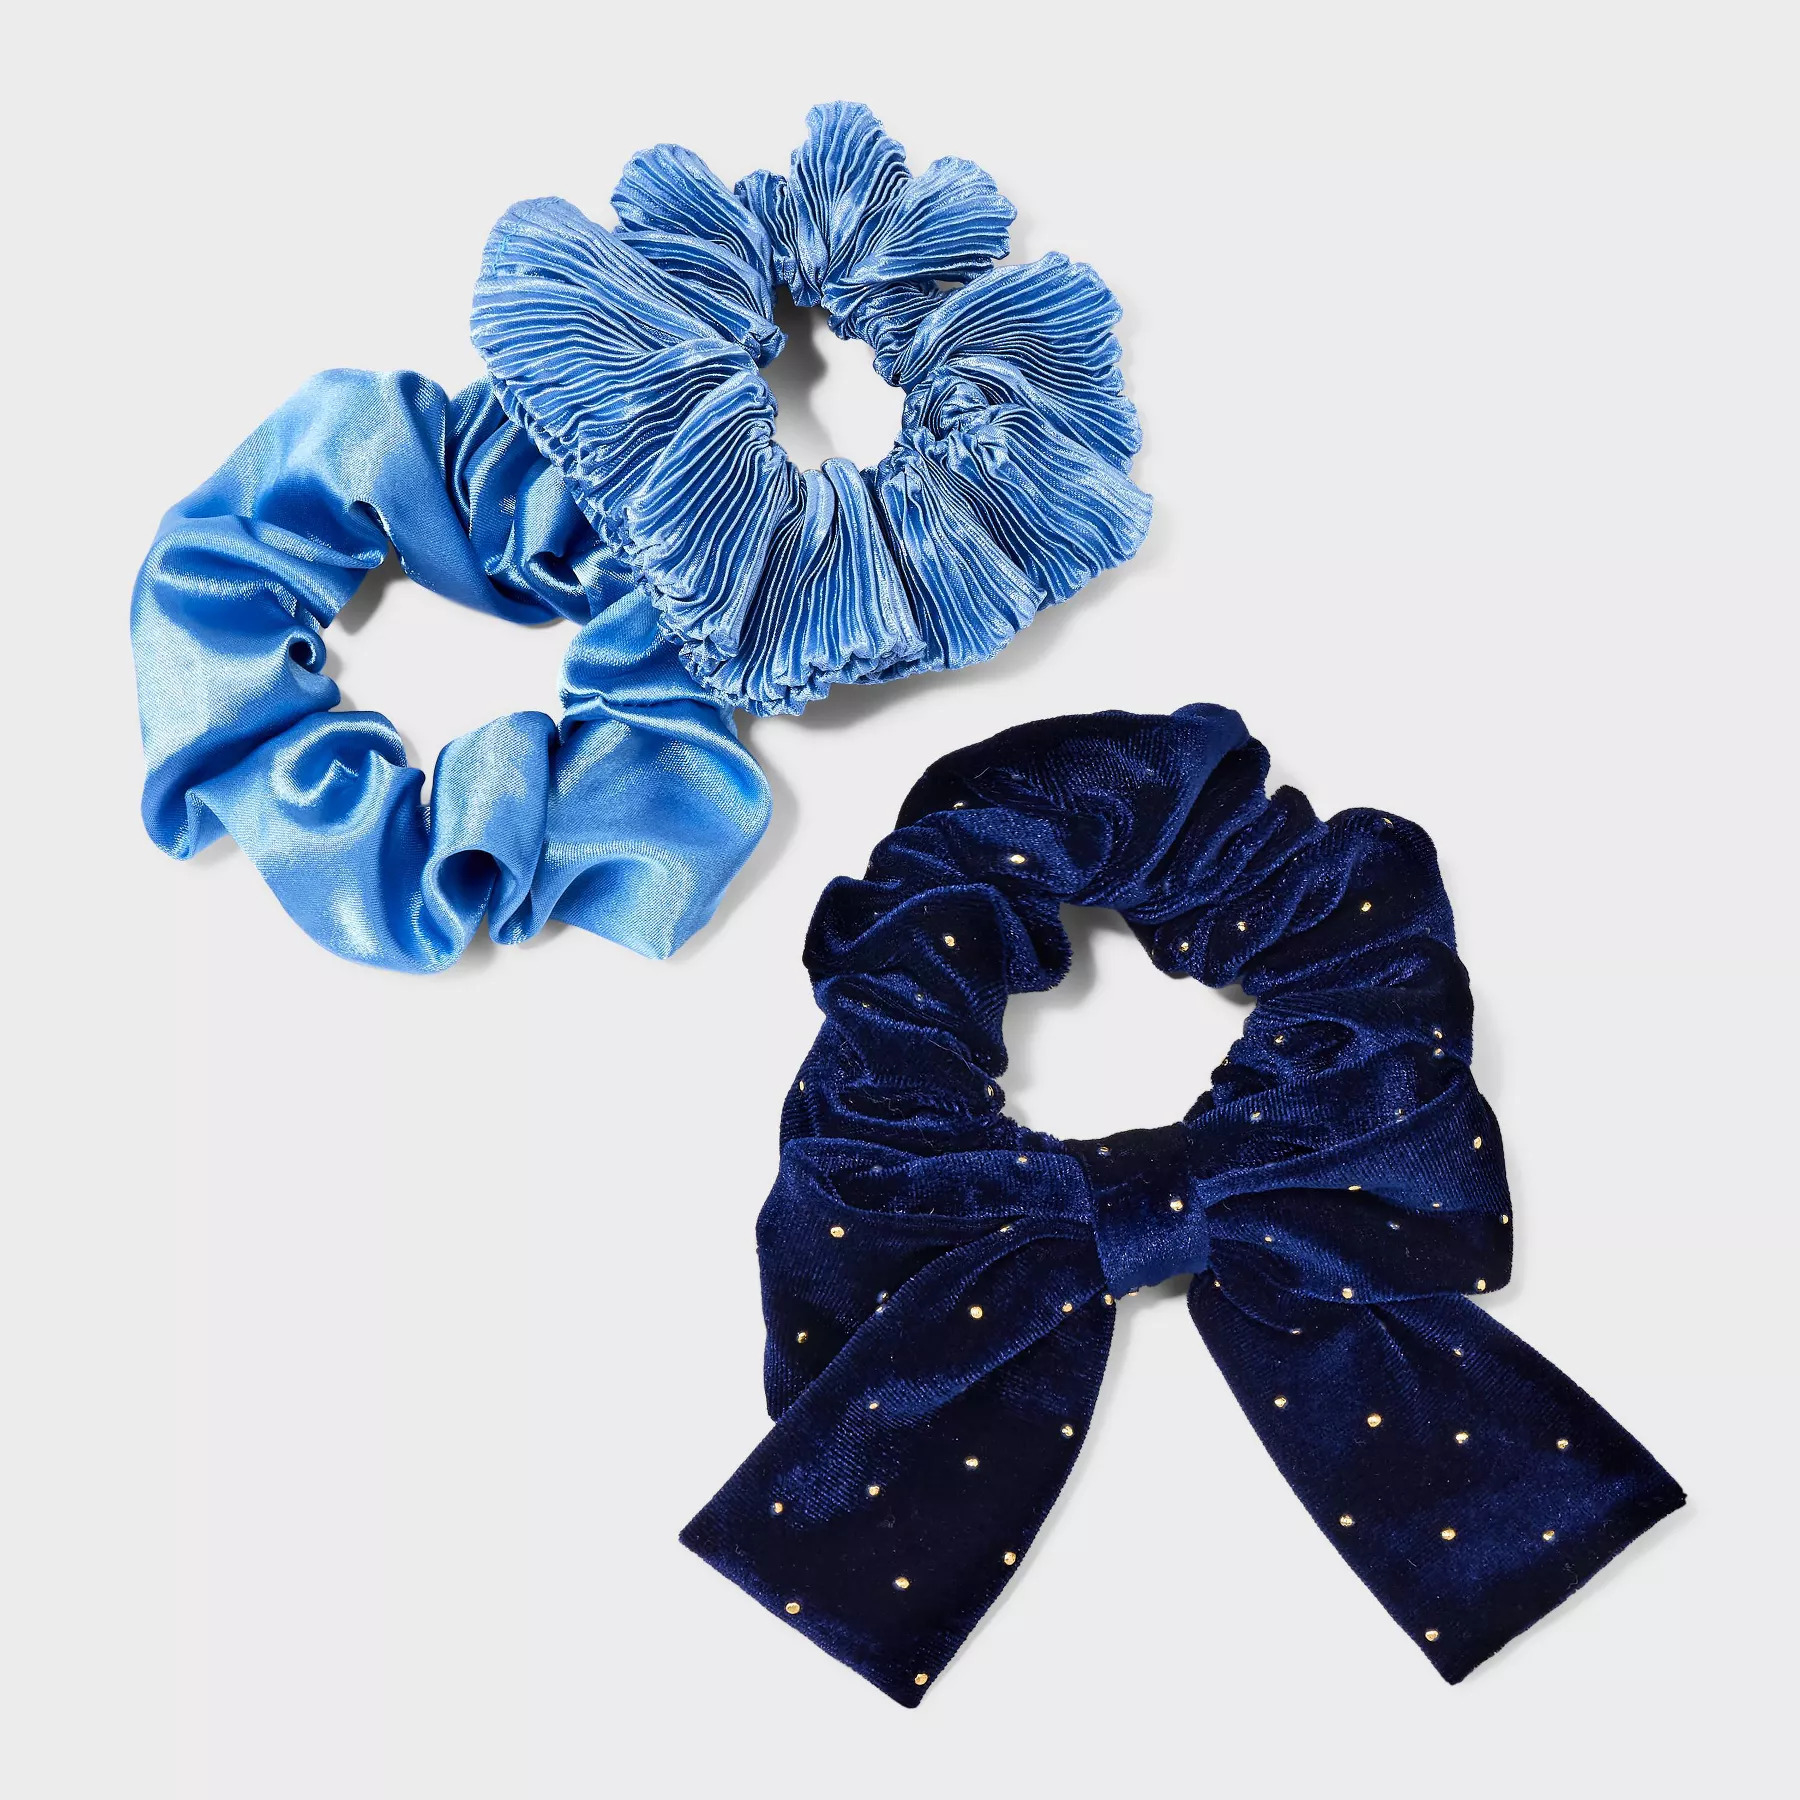 The three scrunchies, one featuring a velvety finish and bow, one with a folded textured design and one with a satin finish in different shades of blue